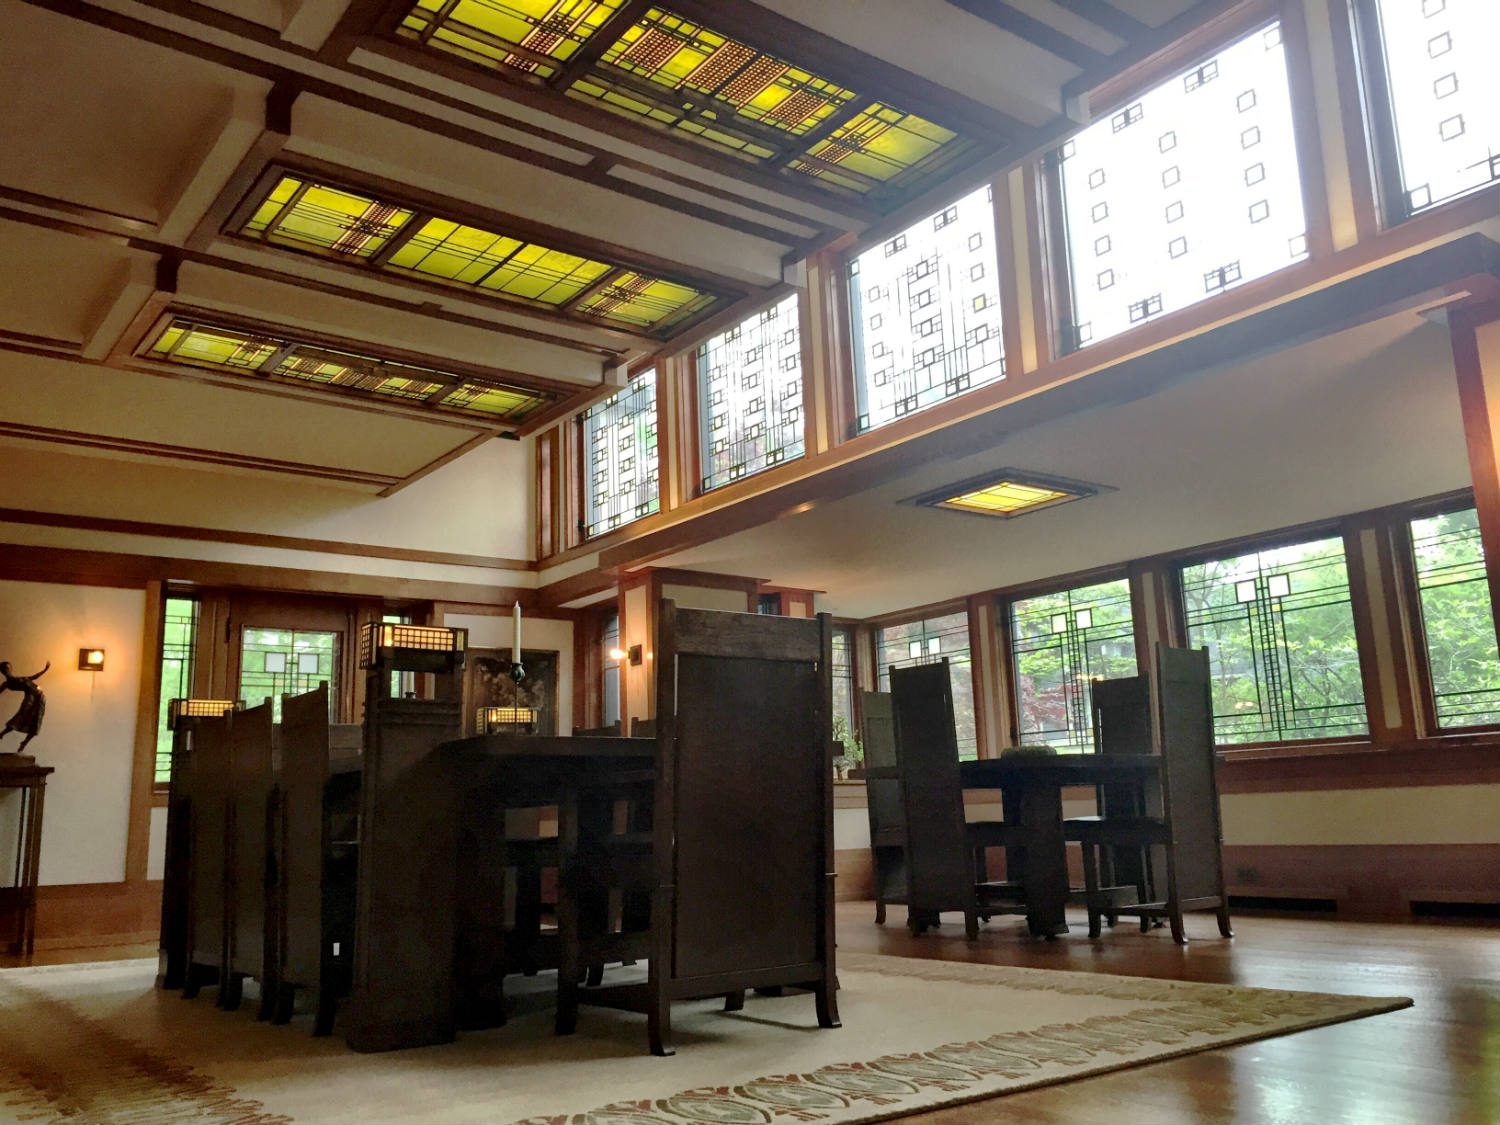 Dining Room Tables and Windows in the Boynton House